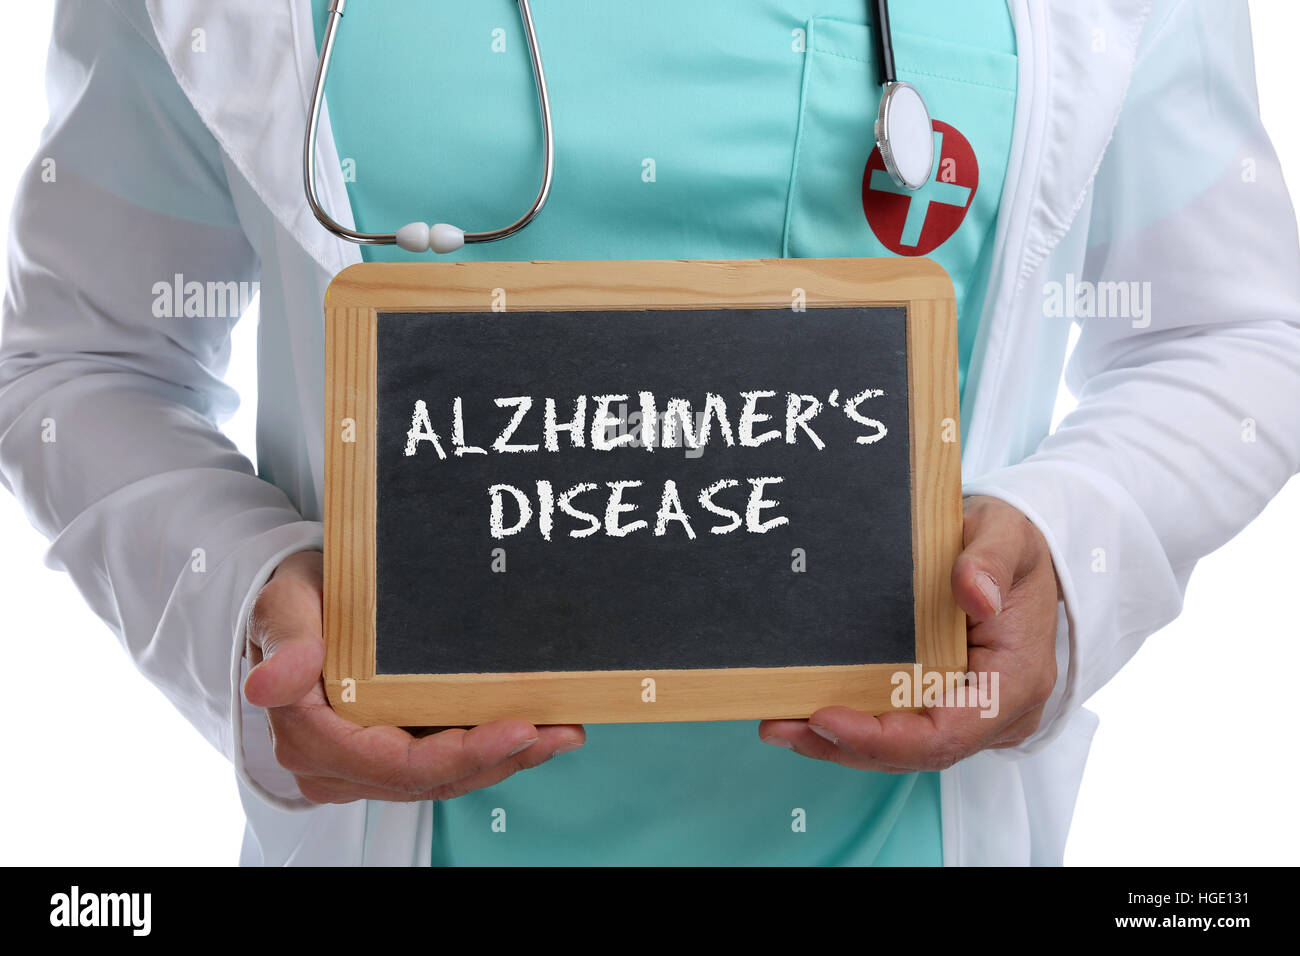 Alzheimers disease Alzheimer Alzheimer's ill illness healthy health young doctor with sign Stock Photo